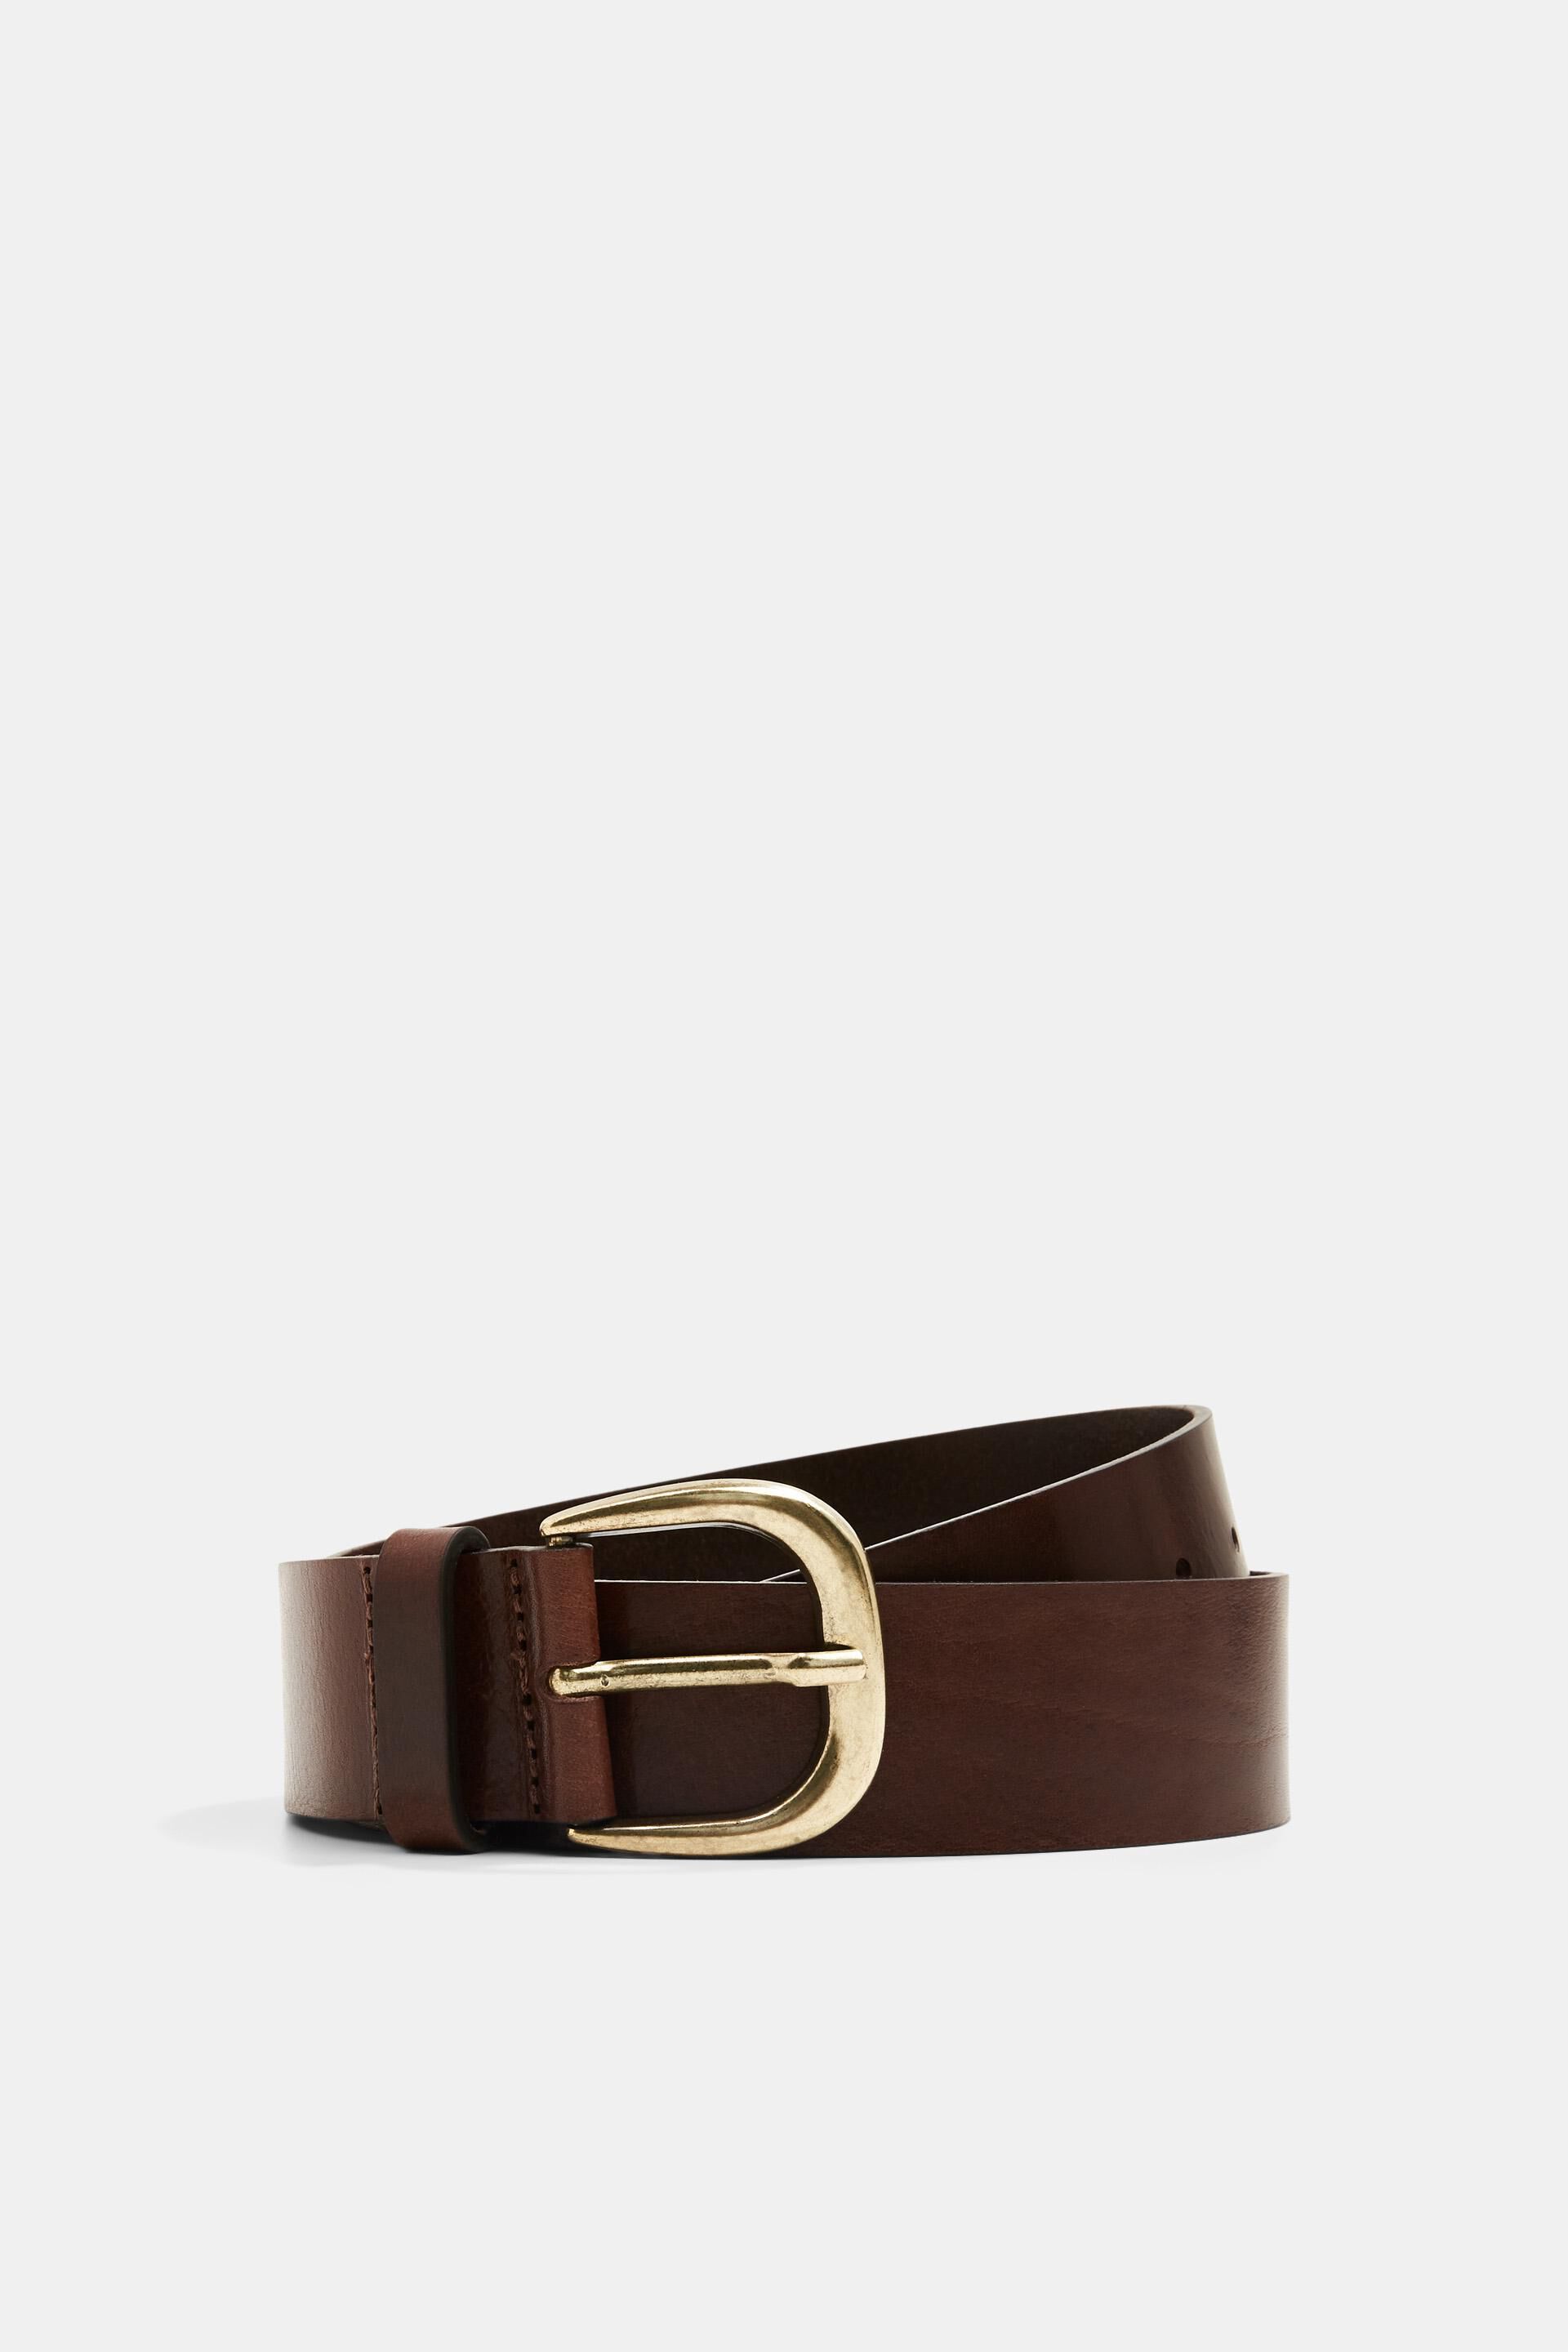 Esprit buckle with Leather belt pin